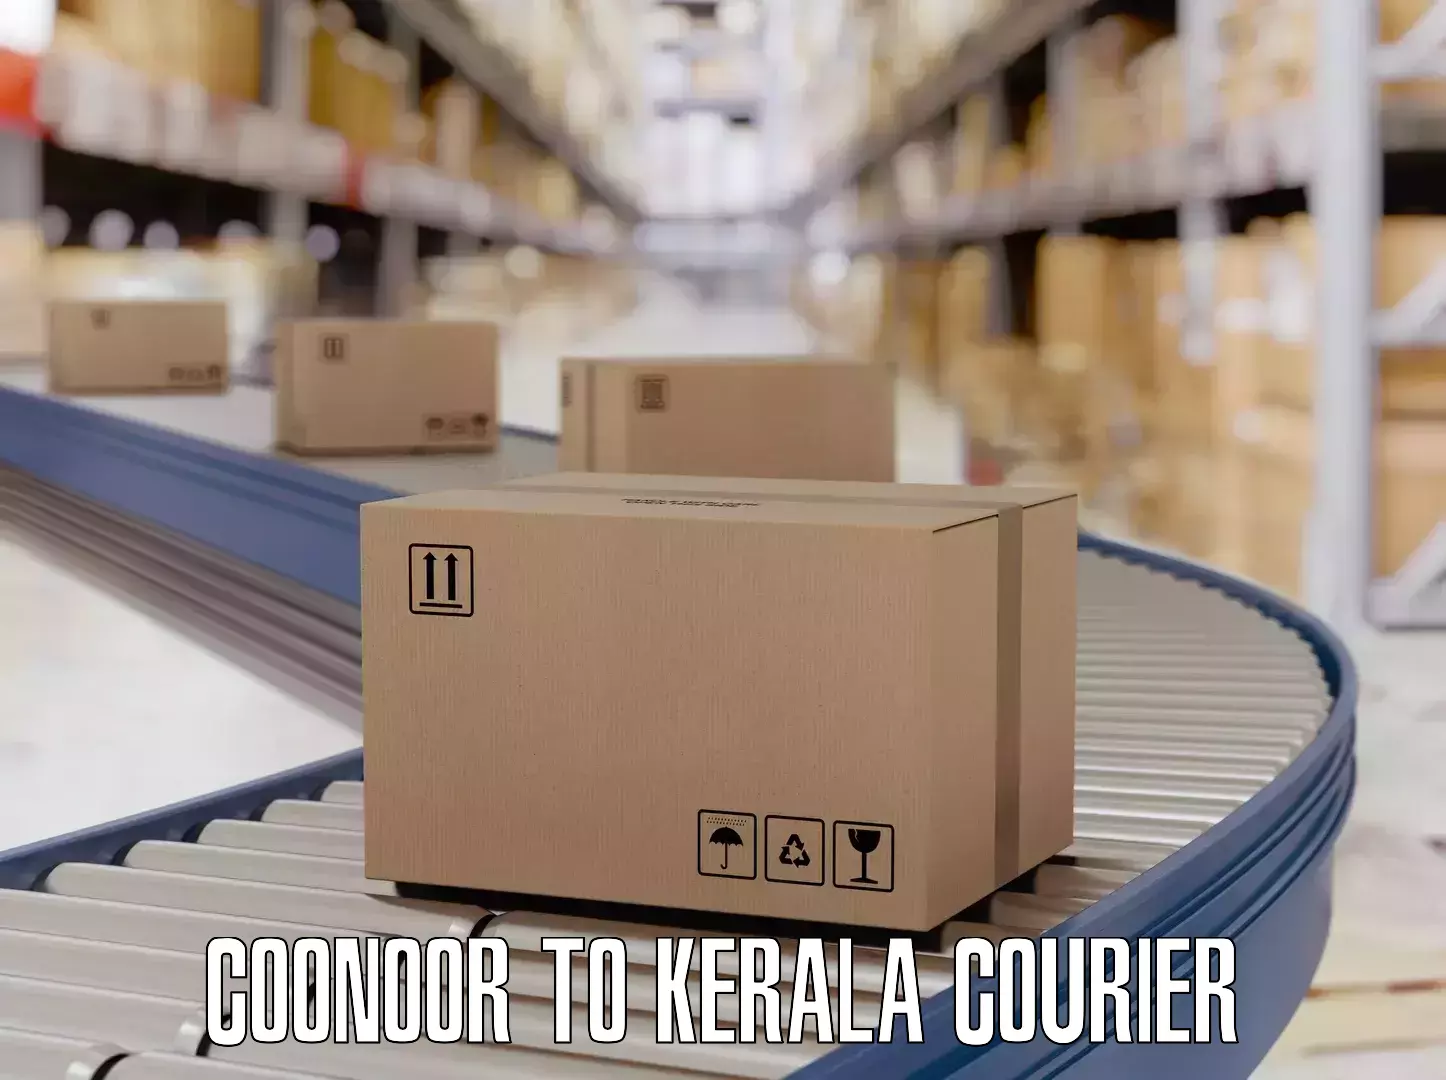 Baggage delivery technology Coonoor to Palakkad